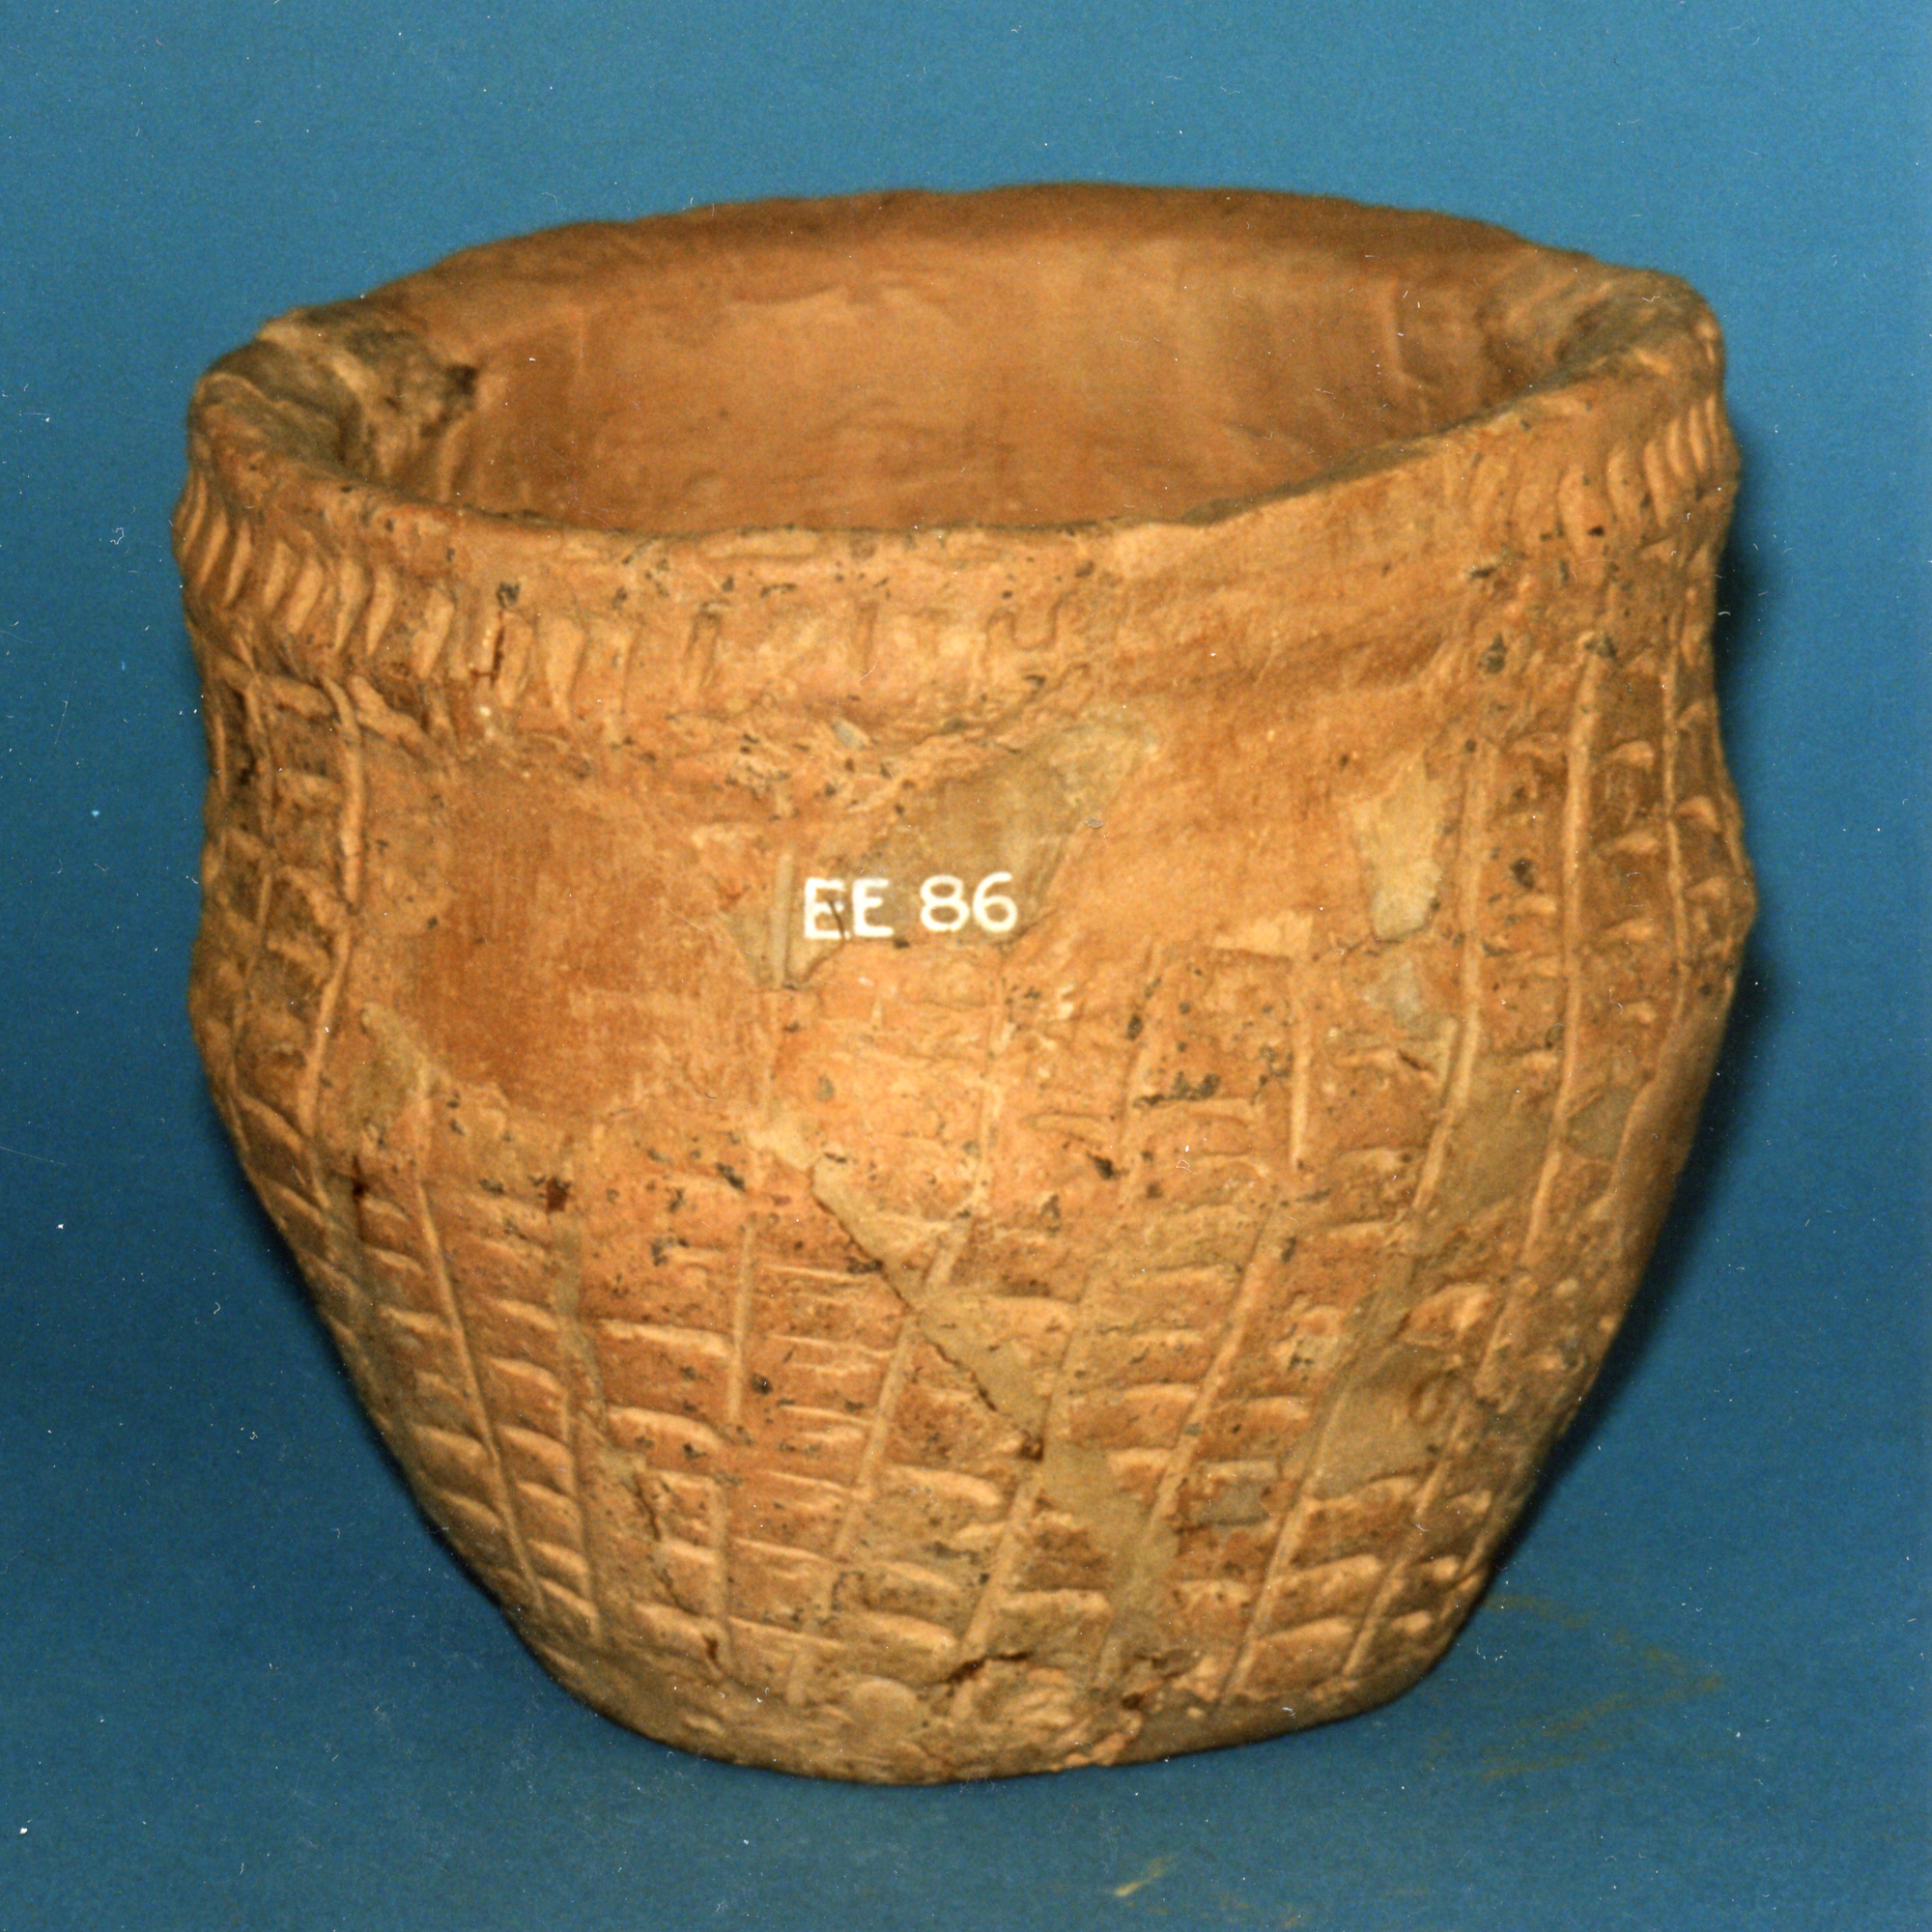 Image of Pottery food vessel from a cist near Doune Castle, Perthshire © National Museums Scotland